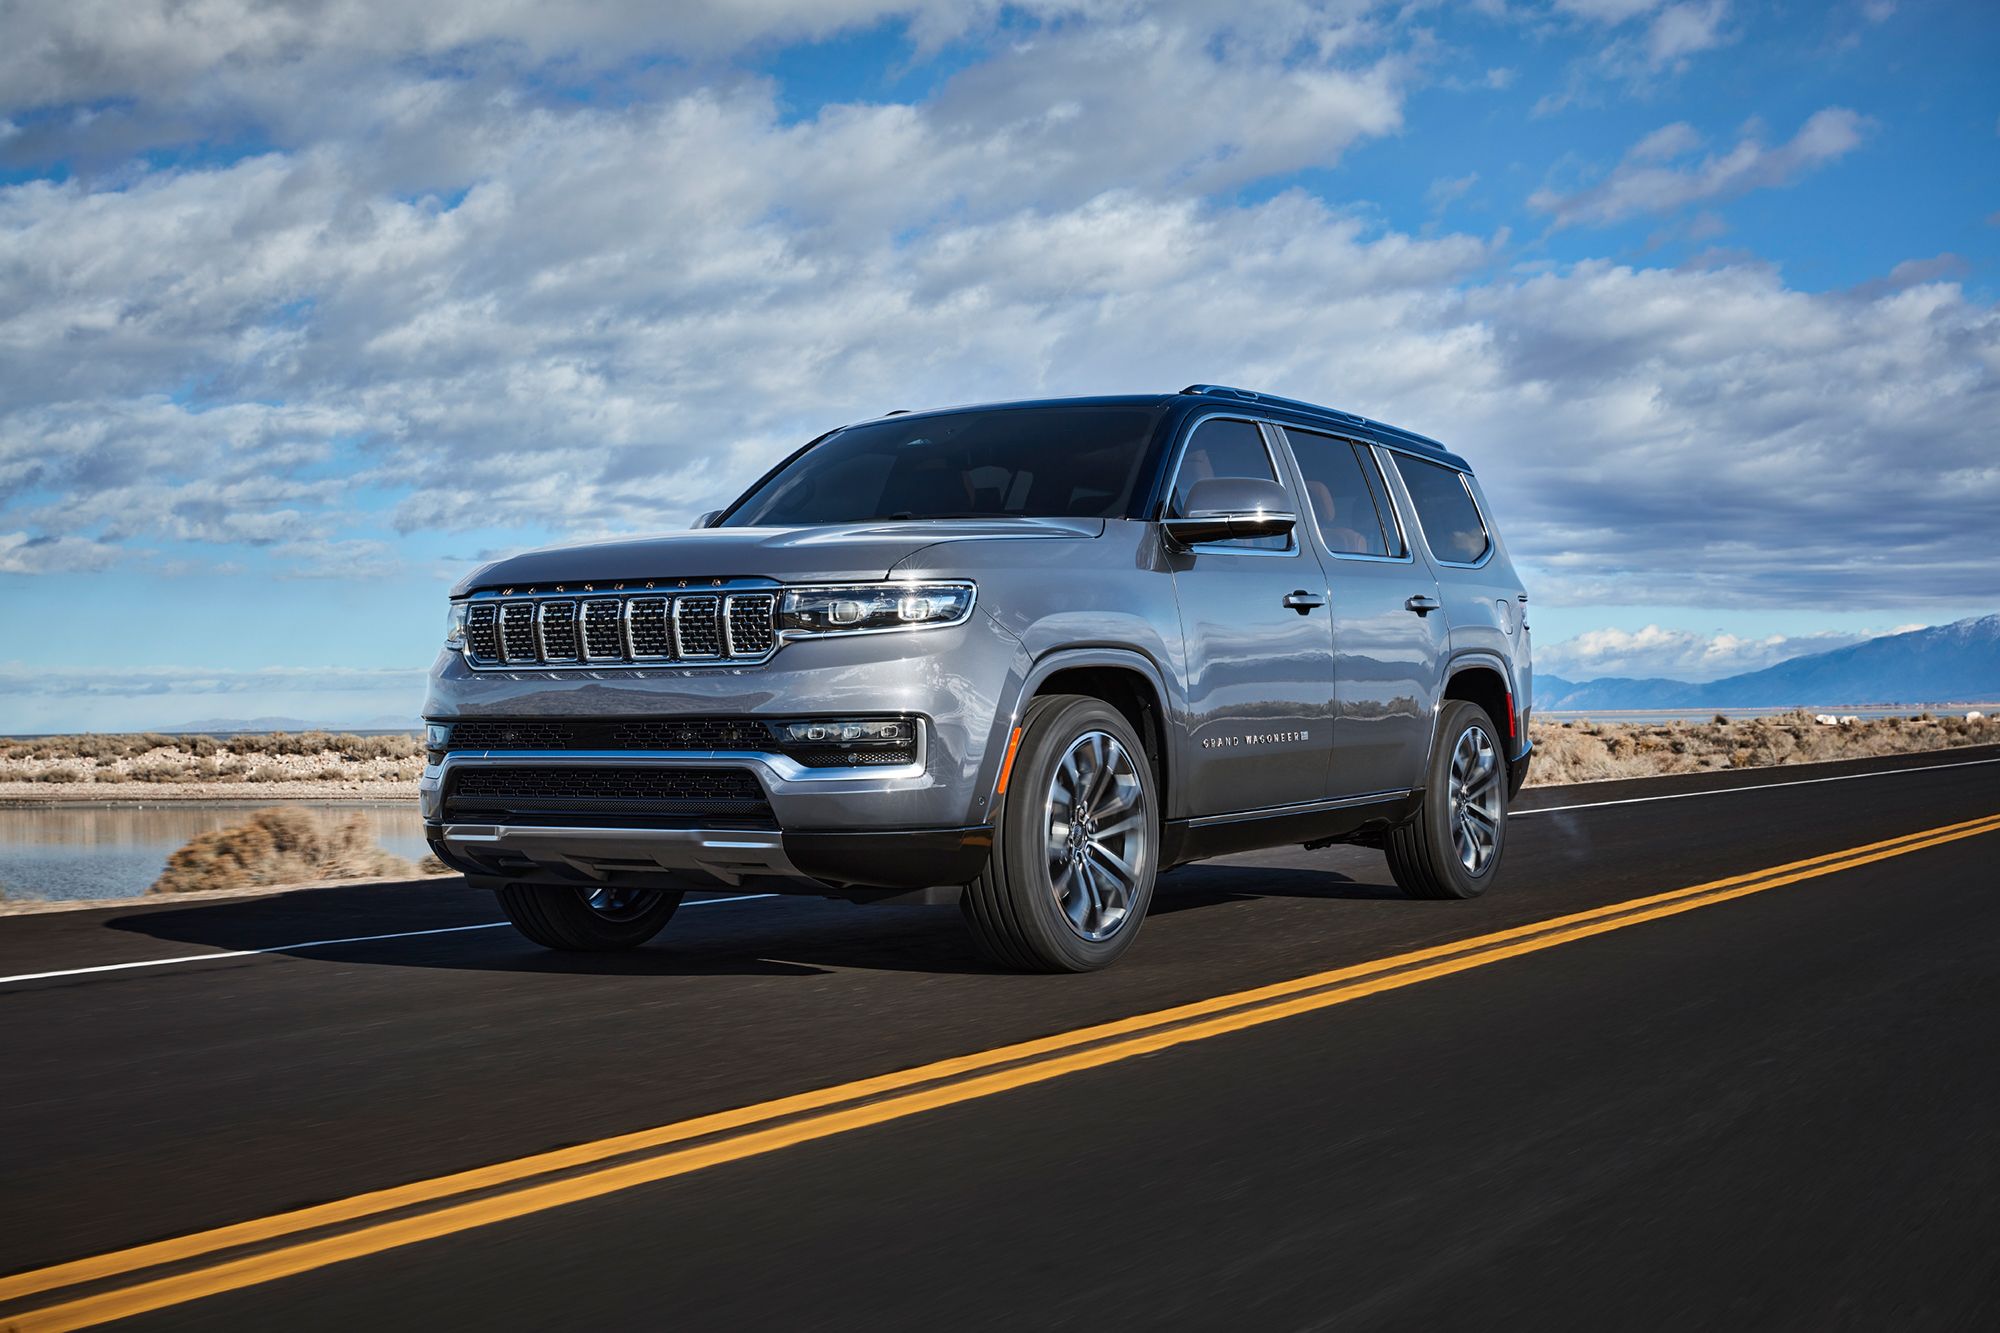 Jeep's new $100,000 Grand Wagoneer takes on Mercedes and BMW | CNN Business